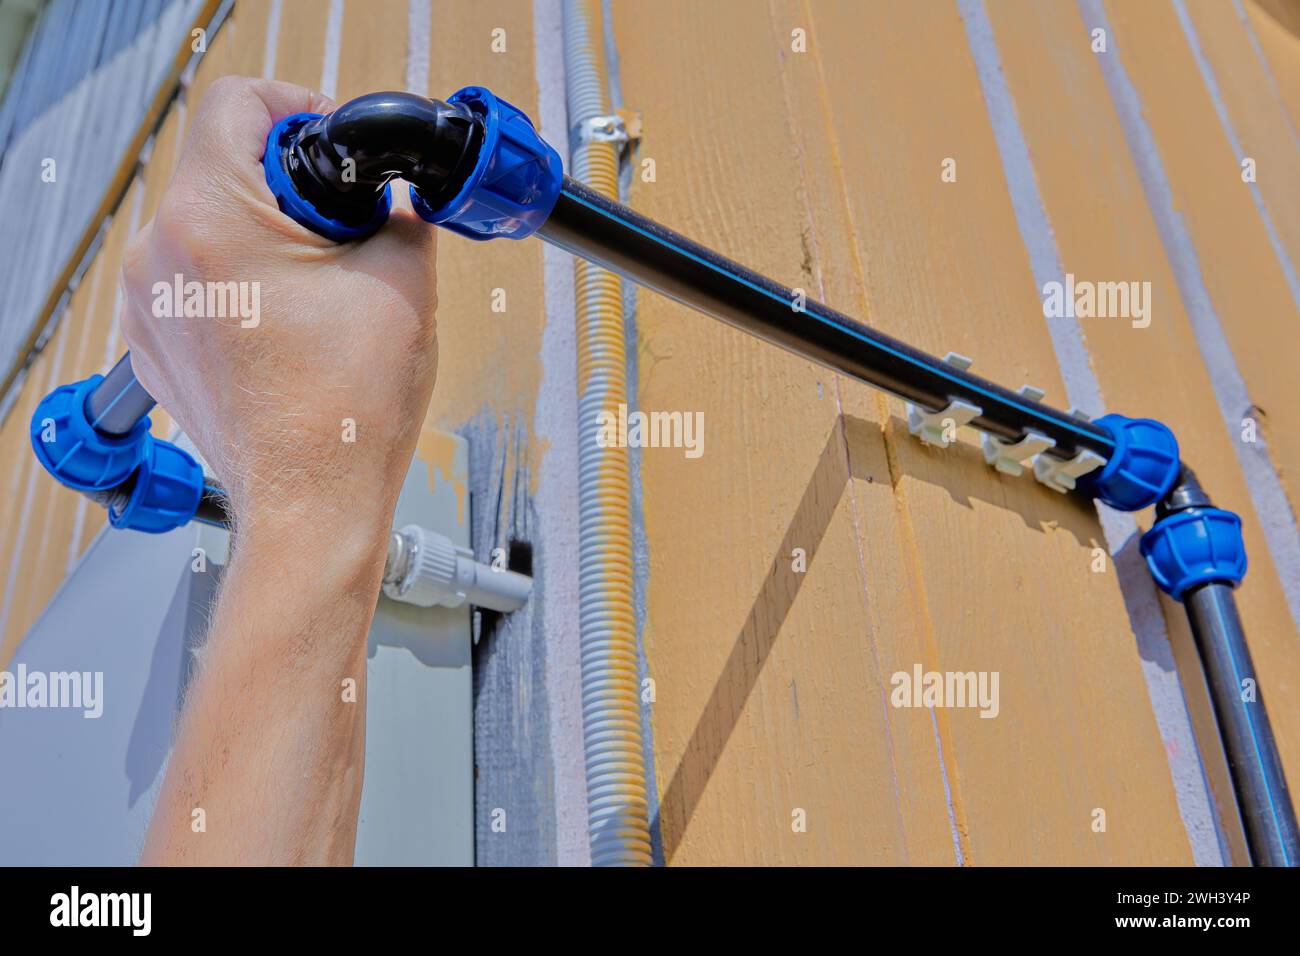 Attaching an angle pipe fitting with a compression threaded clamp to domestic outdoor water supply system for watering and irrigation, assembled from Stock Photo